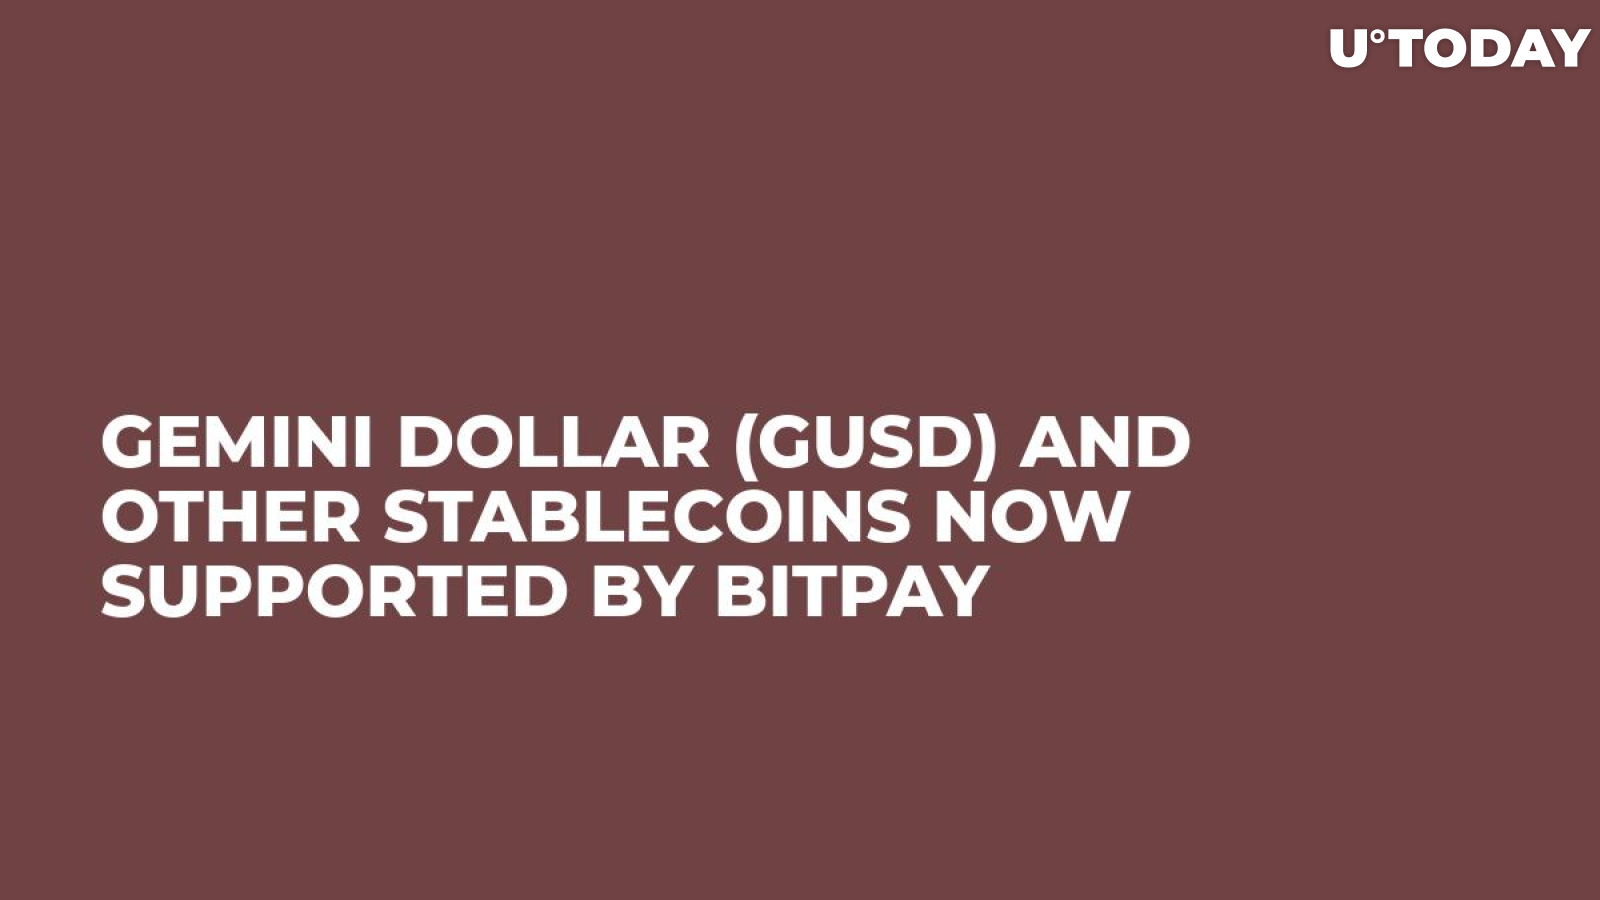 Gemini Dollar (GUSD) and Other Stablecoins Now Supported by BitPay